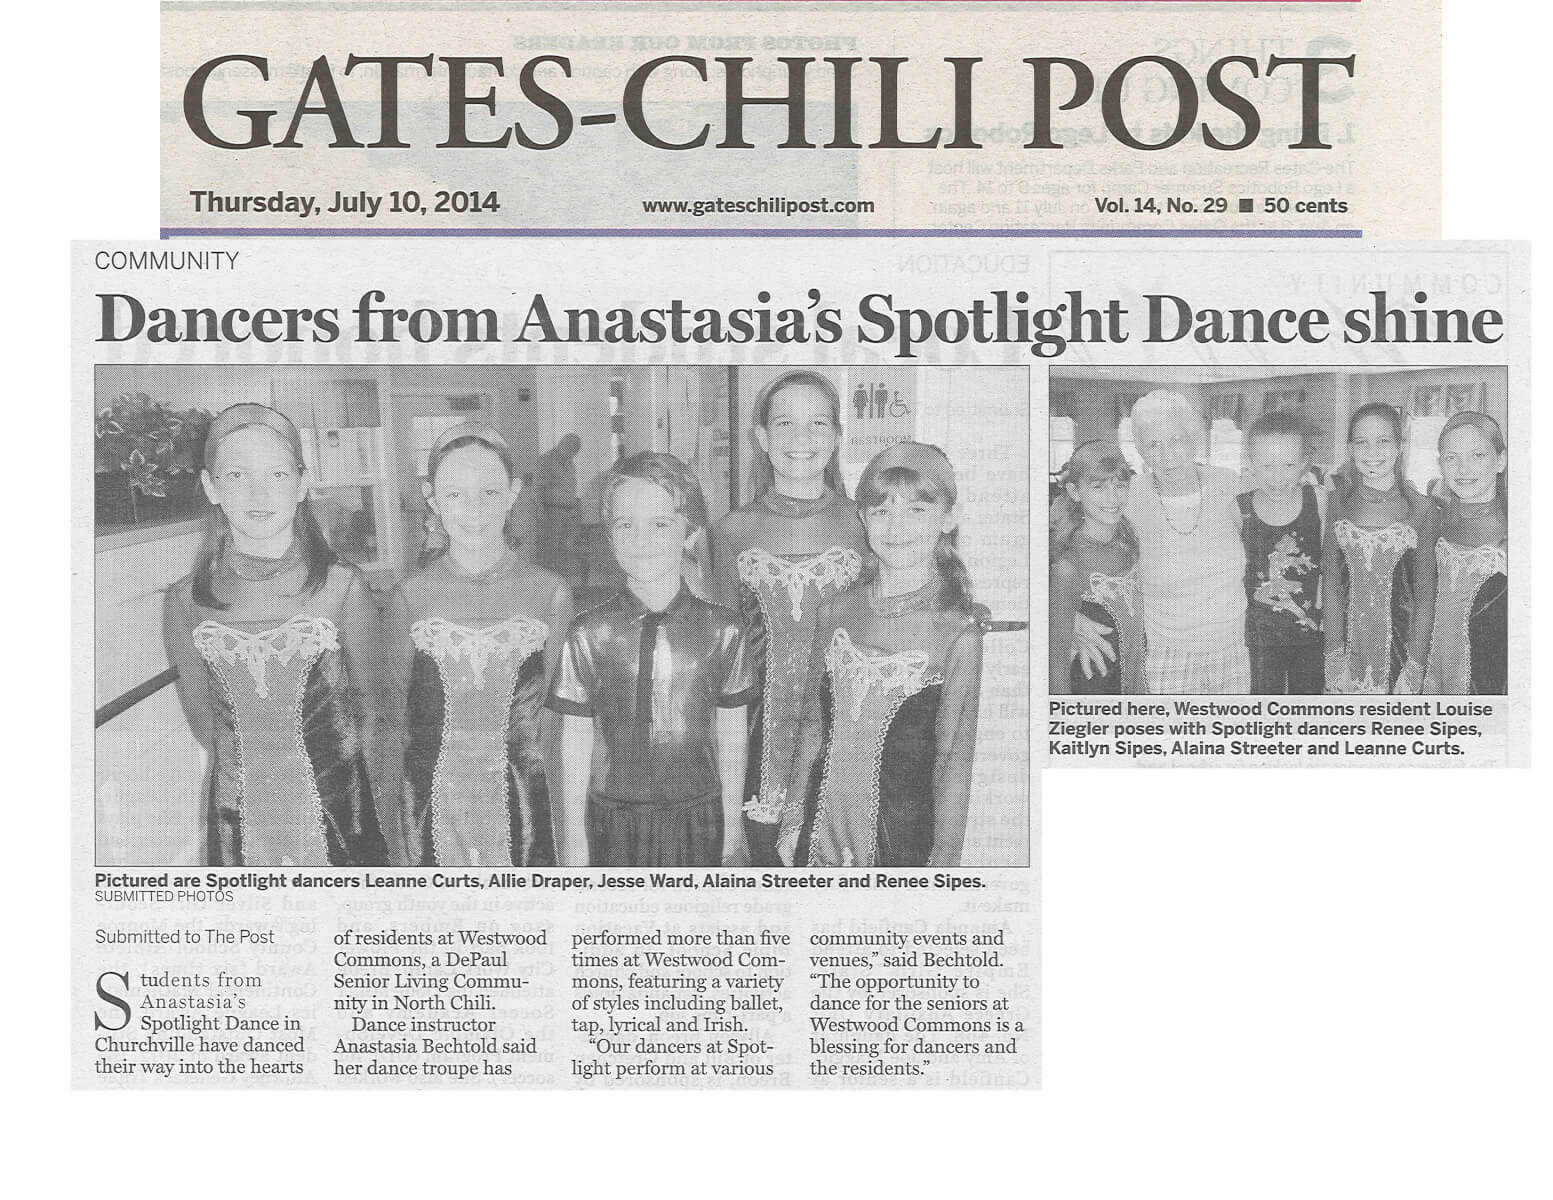 Westwood Commons get a visit from Spotlight Dancers story in the Gates Chili Post July 10, 2014